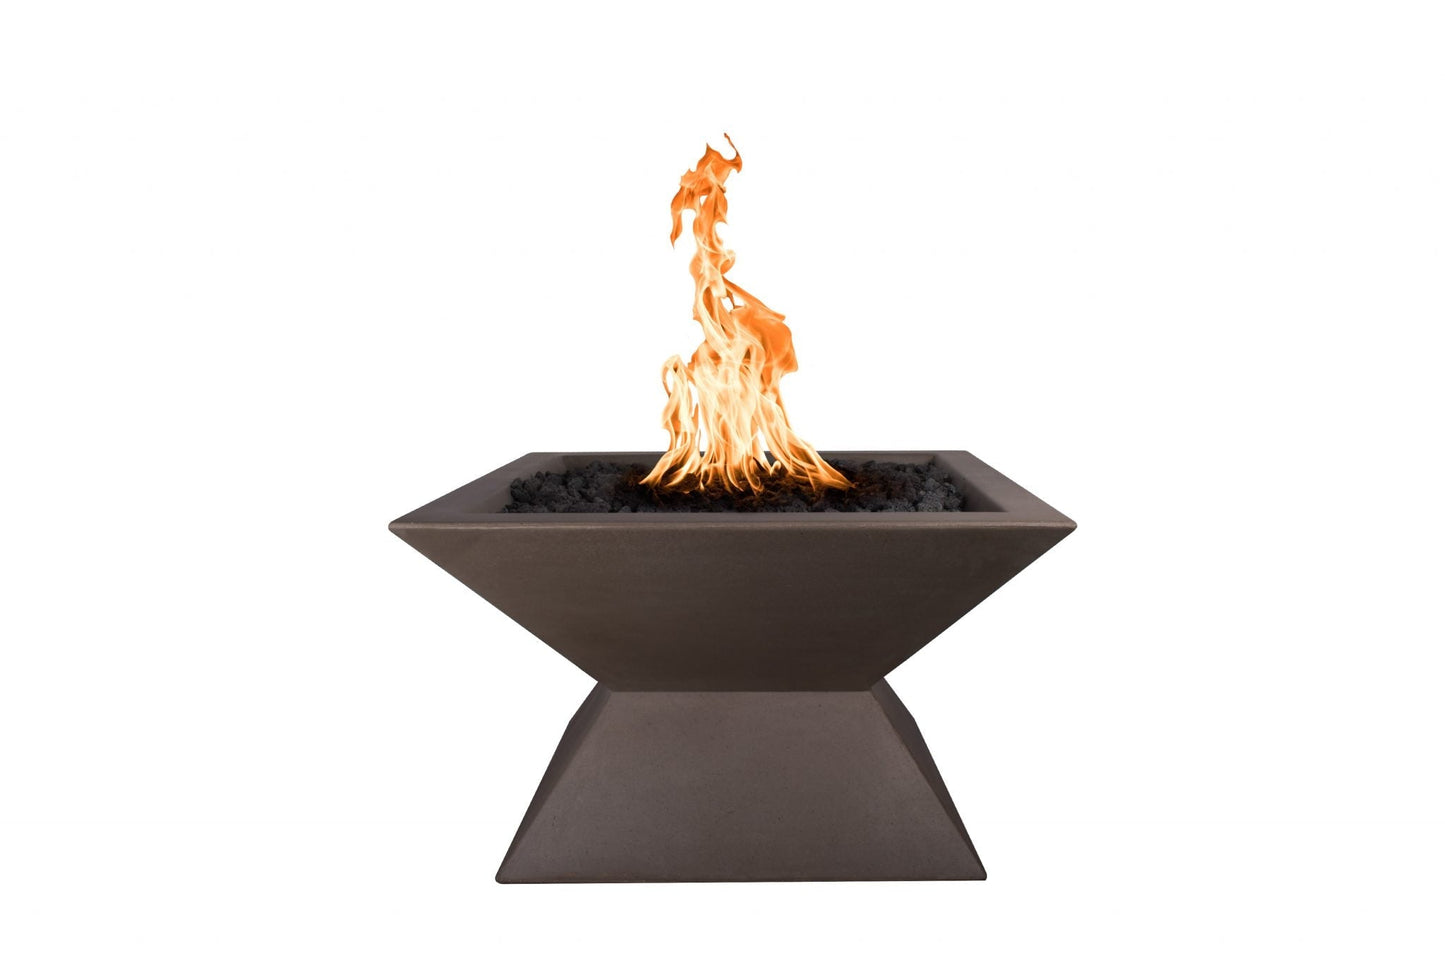 The Outdoor Plus Square Uxmal 30" Rustic Moss Stone GFRC Concrete Liquid Propane Fire Pit with Match Lit with Flame Sense Ignition